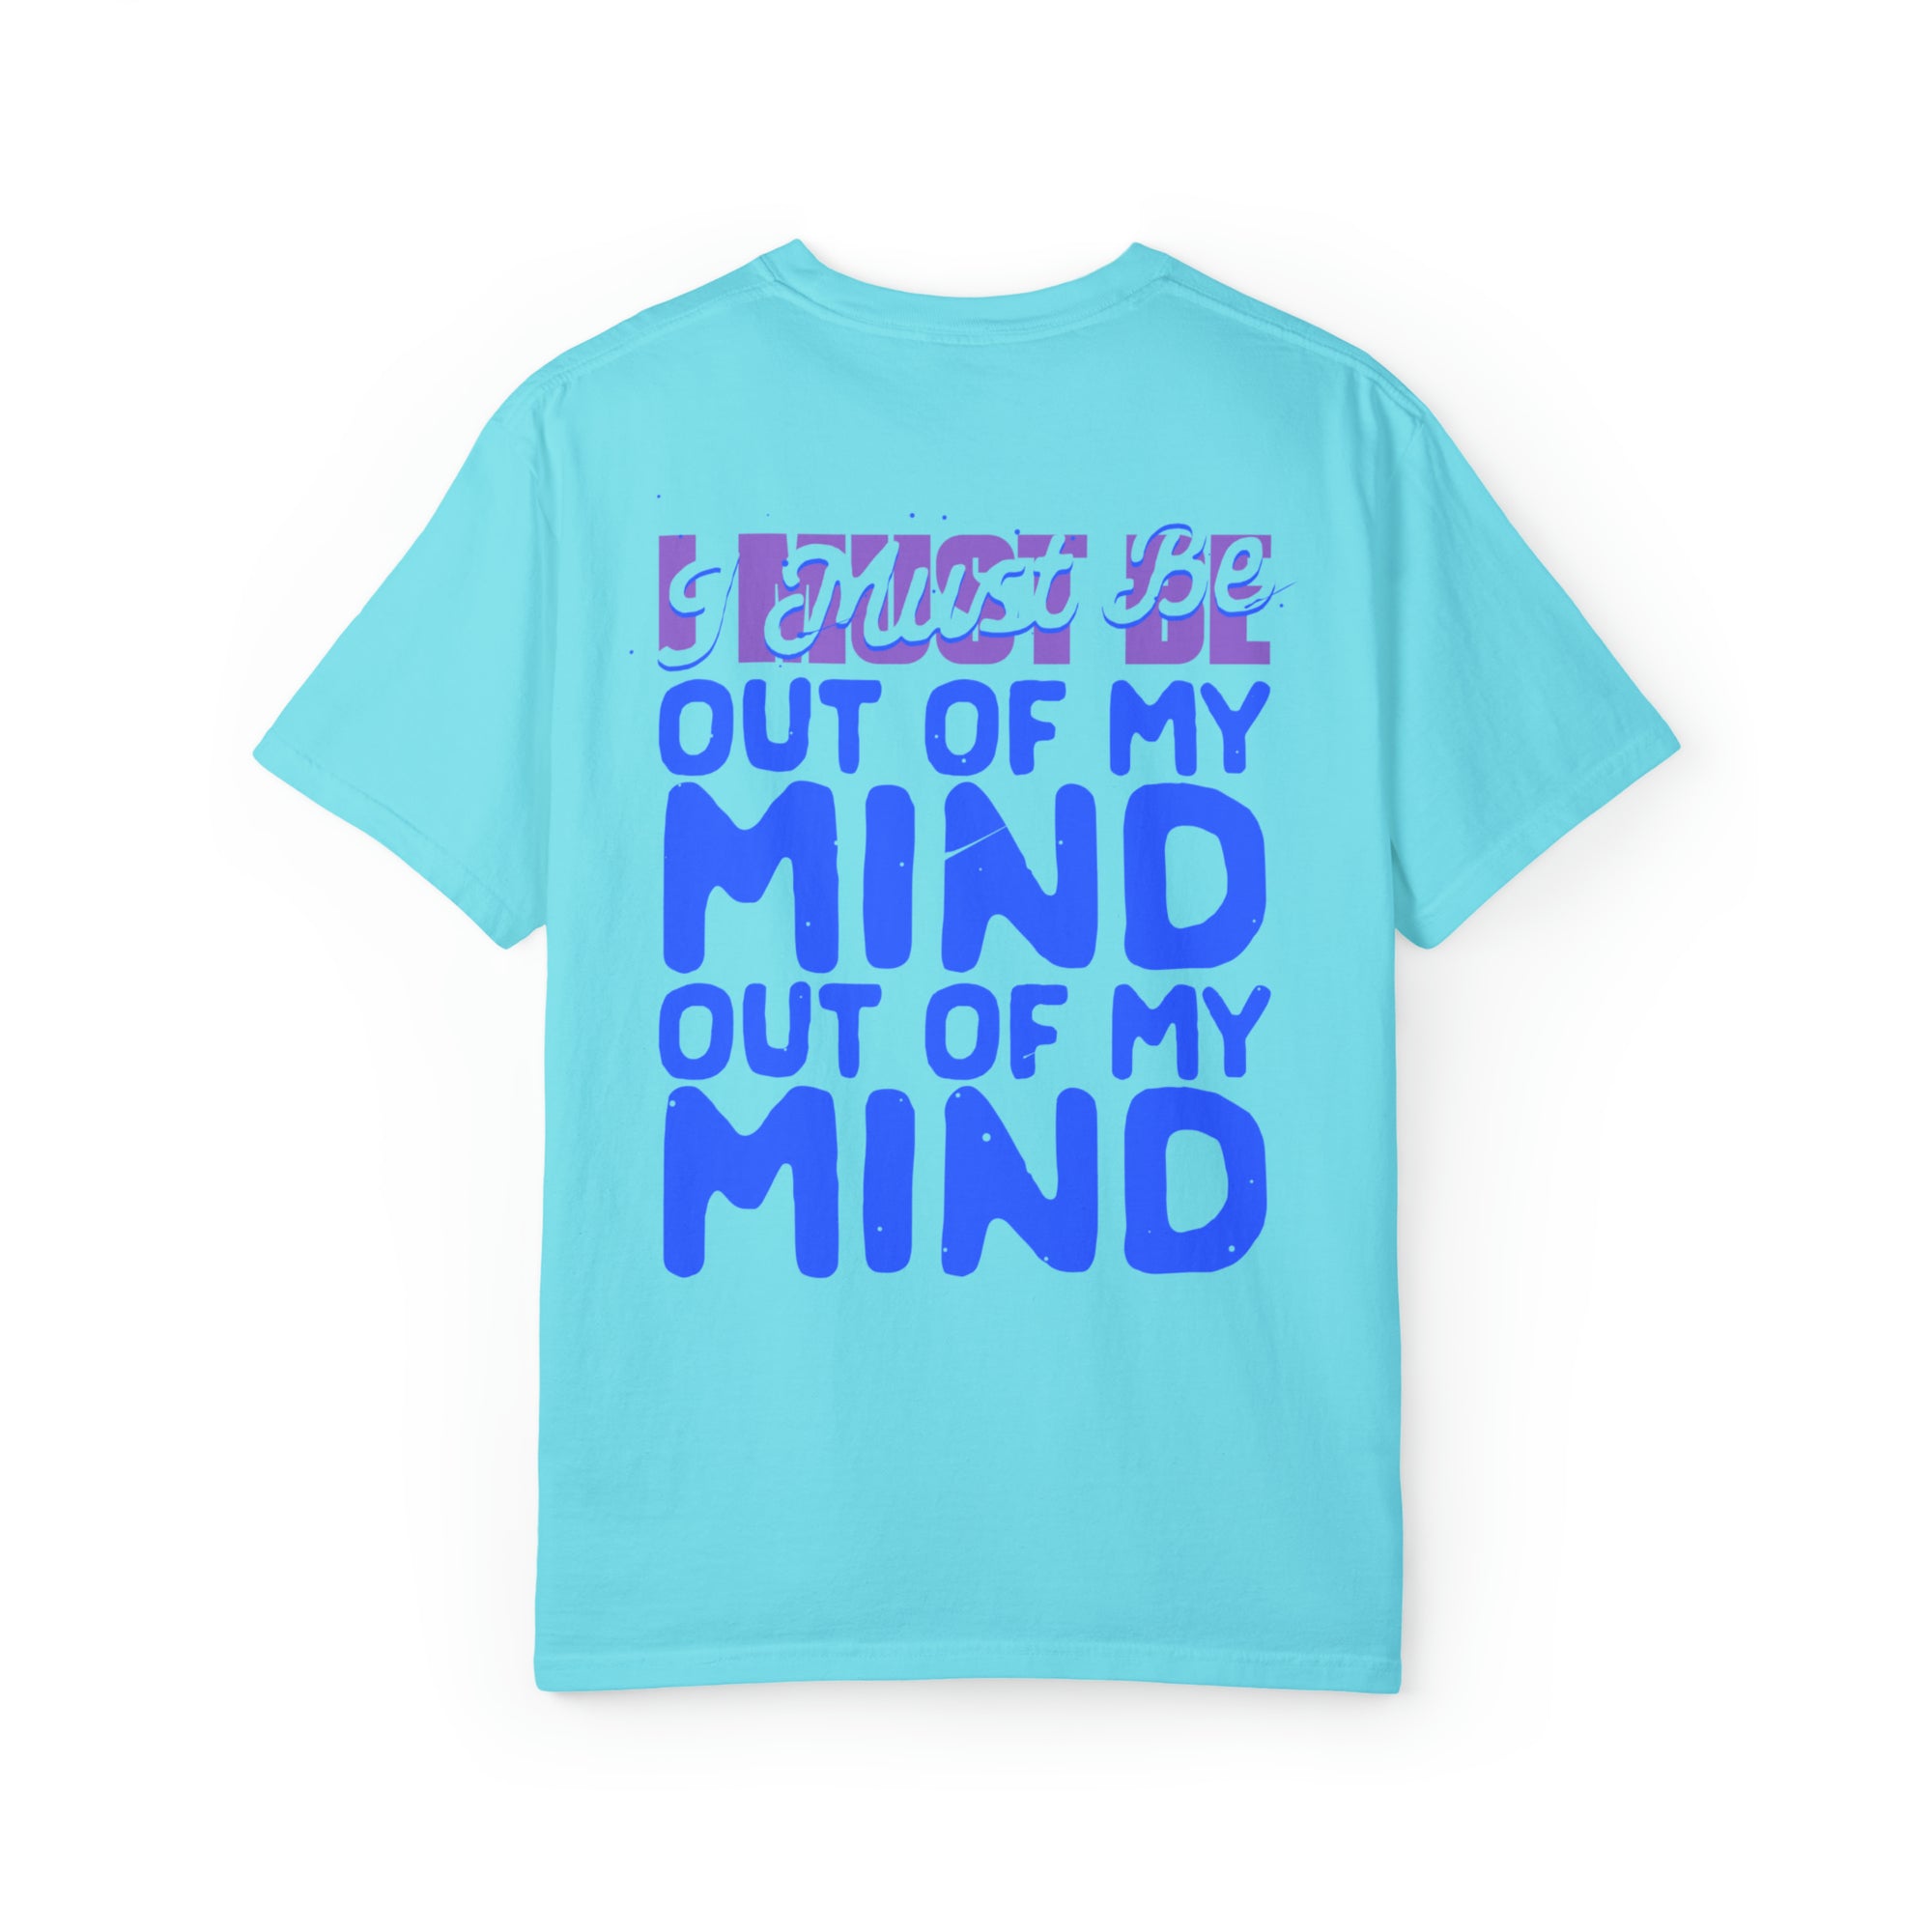 Out Of My Mind Tee - Adult